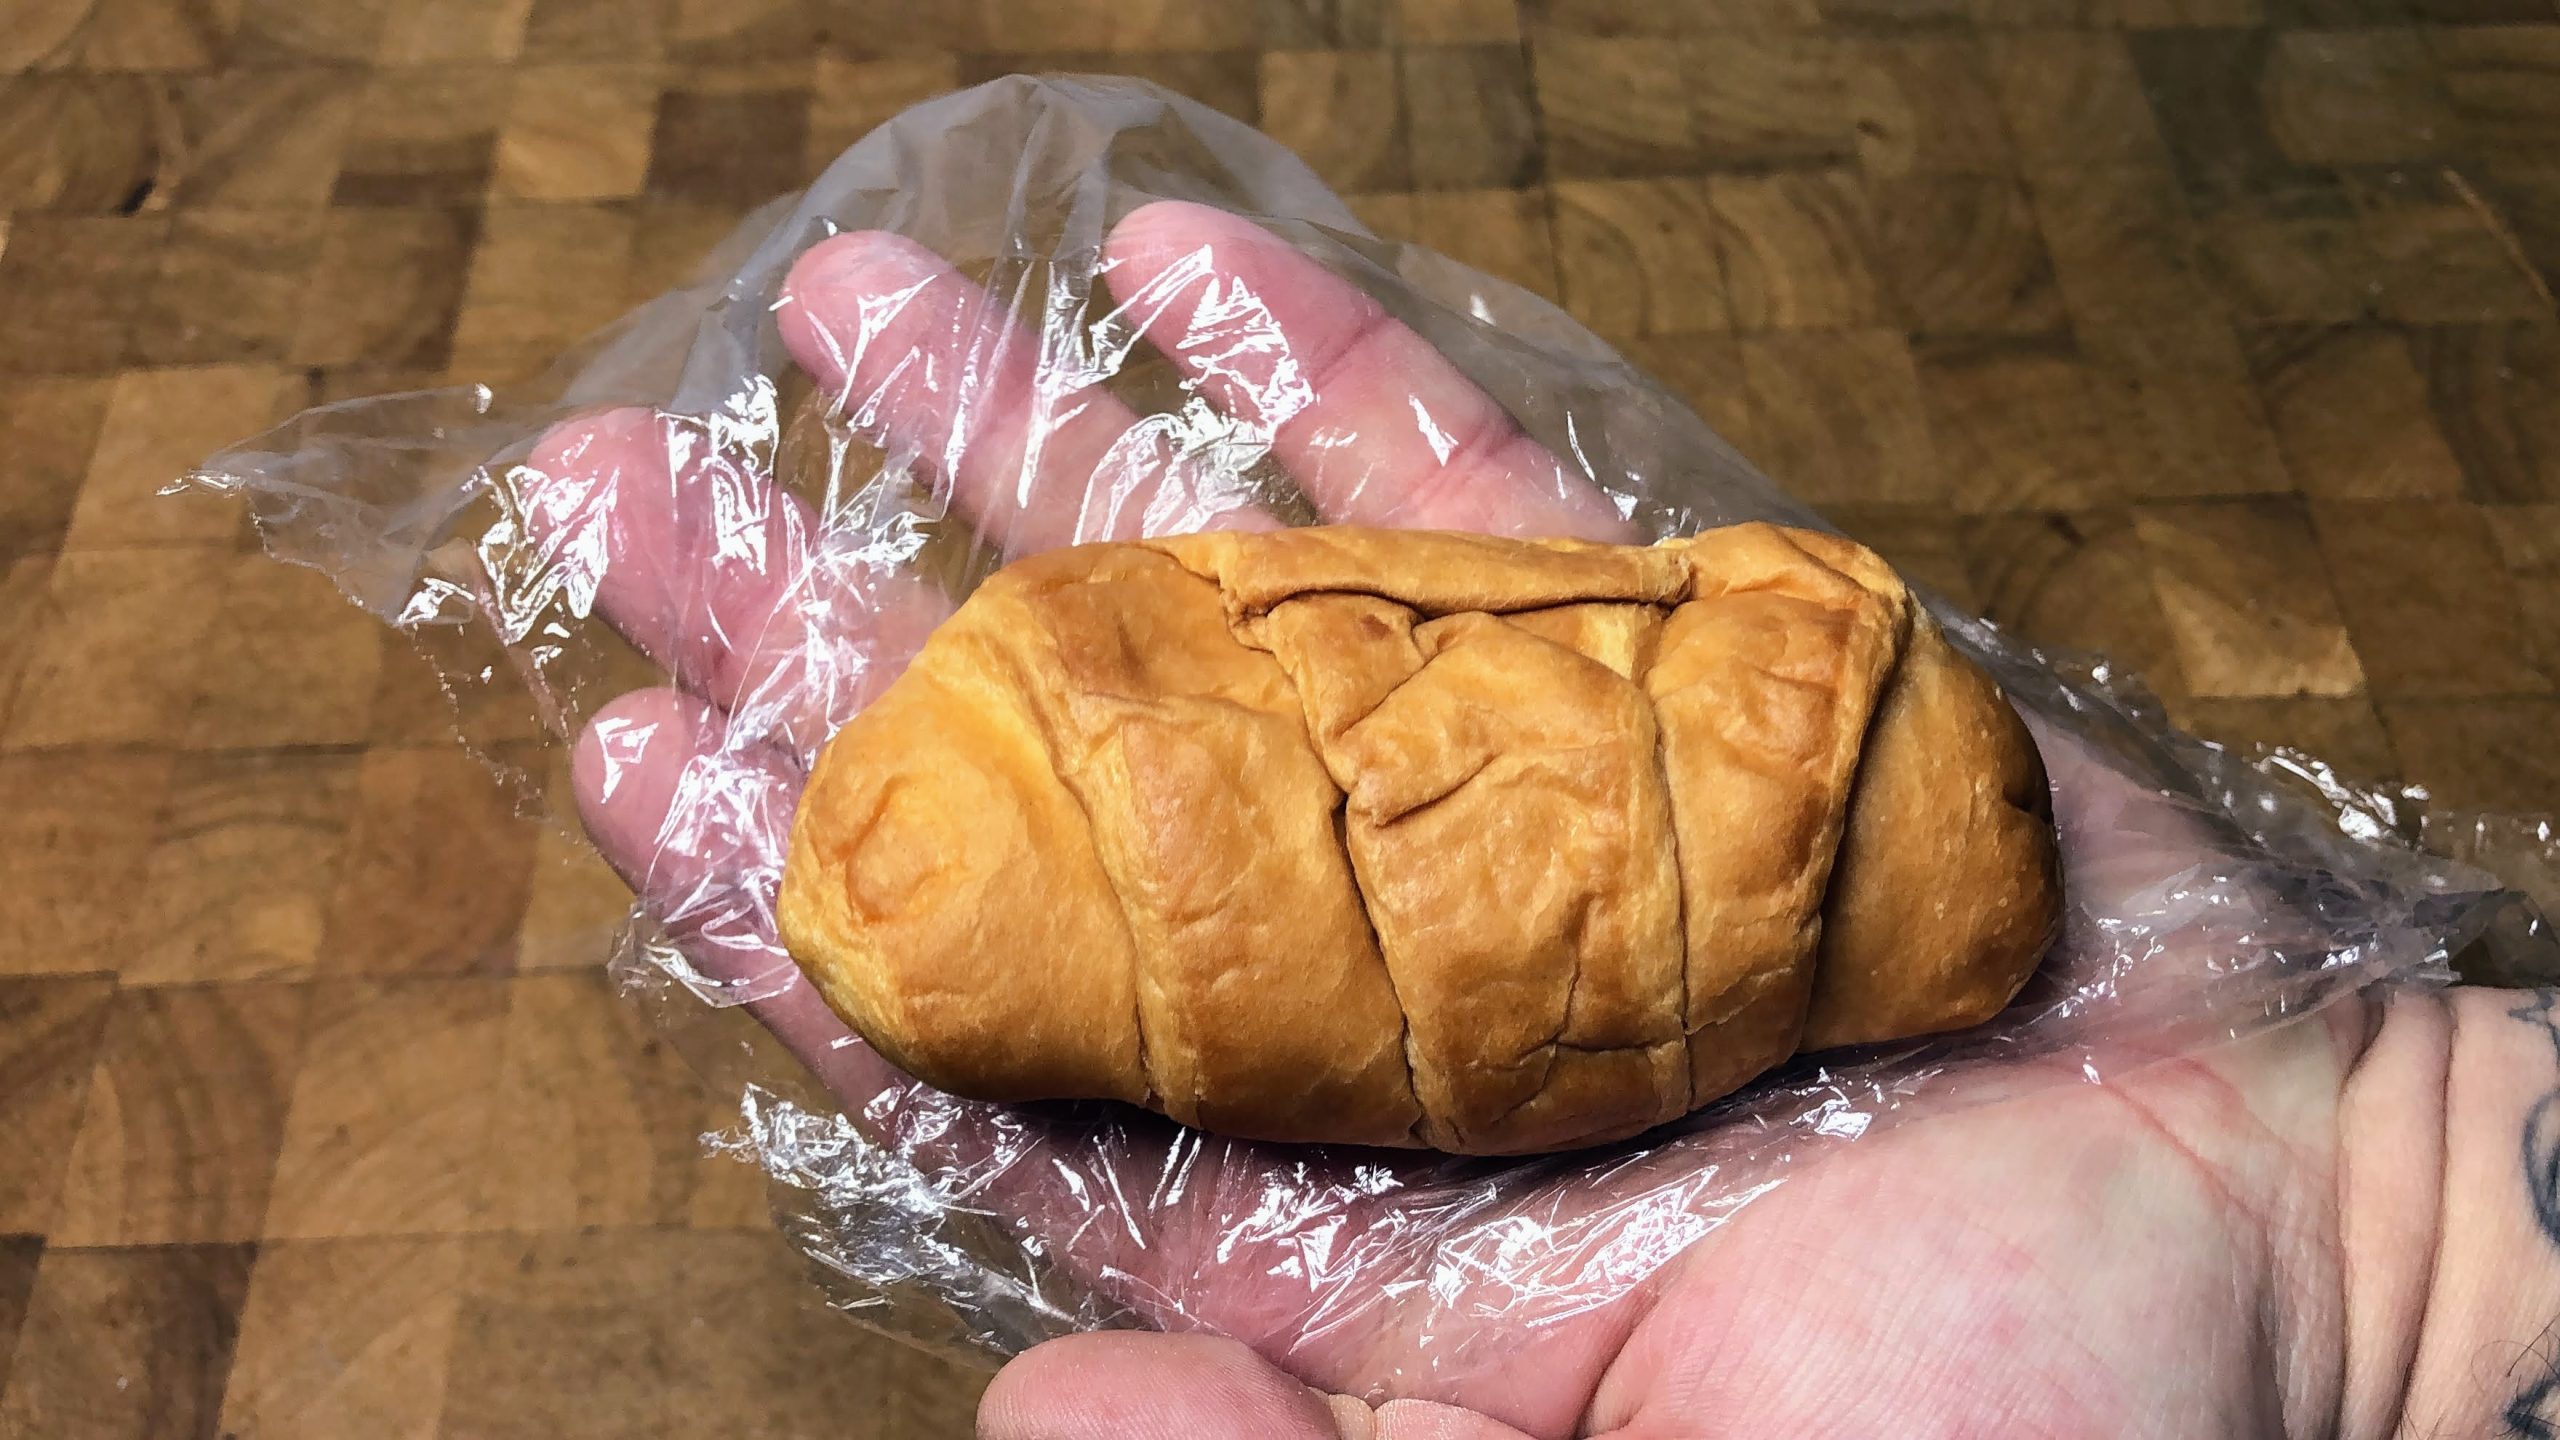 defrosted croissant sitting on a sheet of plastic wrap